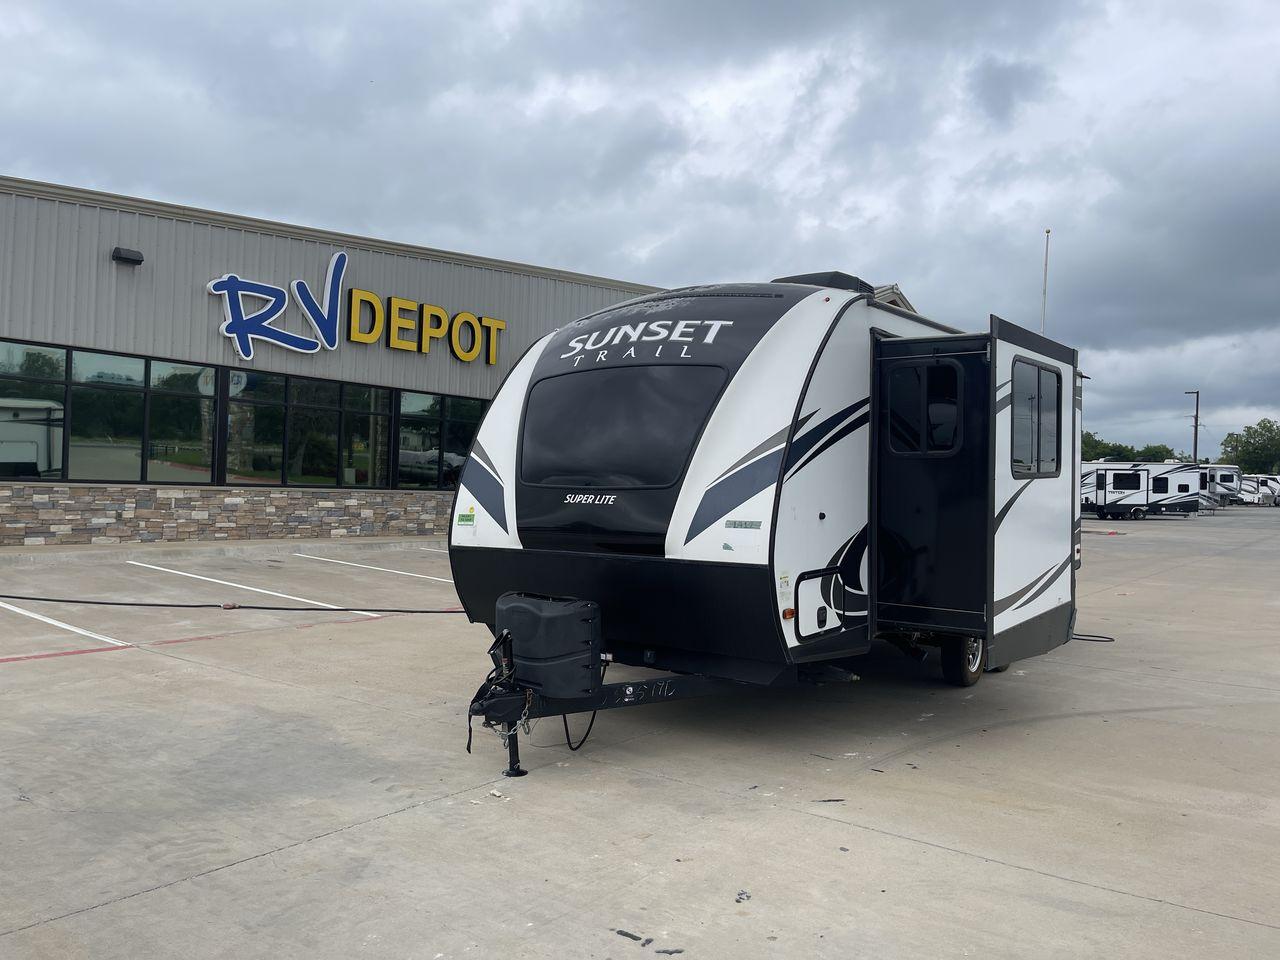 2018 KEYSTONE SUNSET TRAIL 210FK (4YDT21029J5) , Length: 25.92 ft. | Dry Weight: 4,696 lbs. | Gross Weight: 7,600 lbs. | Slides: 1 transmission, located at 4319 N Main Street, Cleburne, TX, 76033, (817) 221-0660, 32.435829, -97.384178 - With the 2018 Keystone Sunset Trail 210FK Travel Trailer, set out on a journey of comfort and style. This travel trailer provides a well-designed living area for your trips, making it perfect for small families or couples. The dimensions of this unit are 25.92 ft in length, 8 ft in width, and 11. - Photo #0